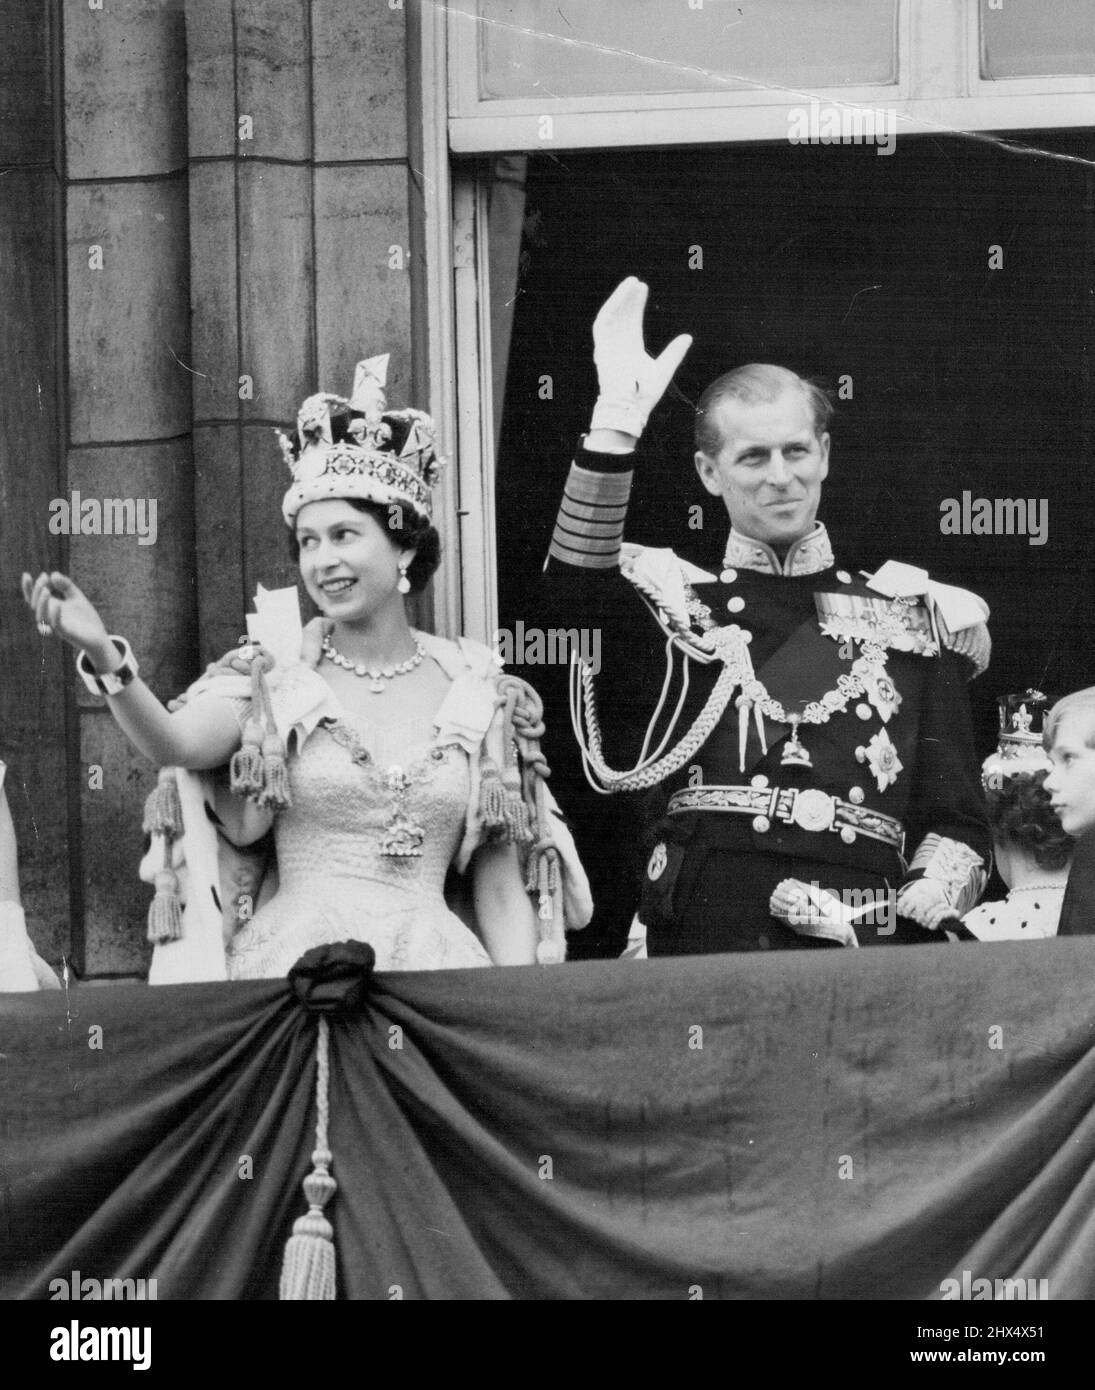 Her Happiest Day - One of the happiest picture of a happy day - the Queen, wearing the Imperial State Crown, and the Duke Edinburgh, in uniform of Admiral of the Fleet, smile and wave. From the balcony to the milling crowds pressing around the gates of Buckingham Palace after the coronation to-day (Tuesday). June 02, 1953. (Photo by Reuterphoto). Stock Photo